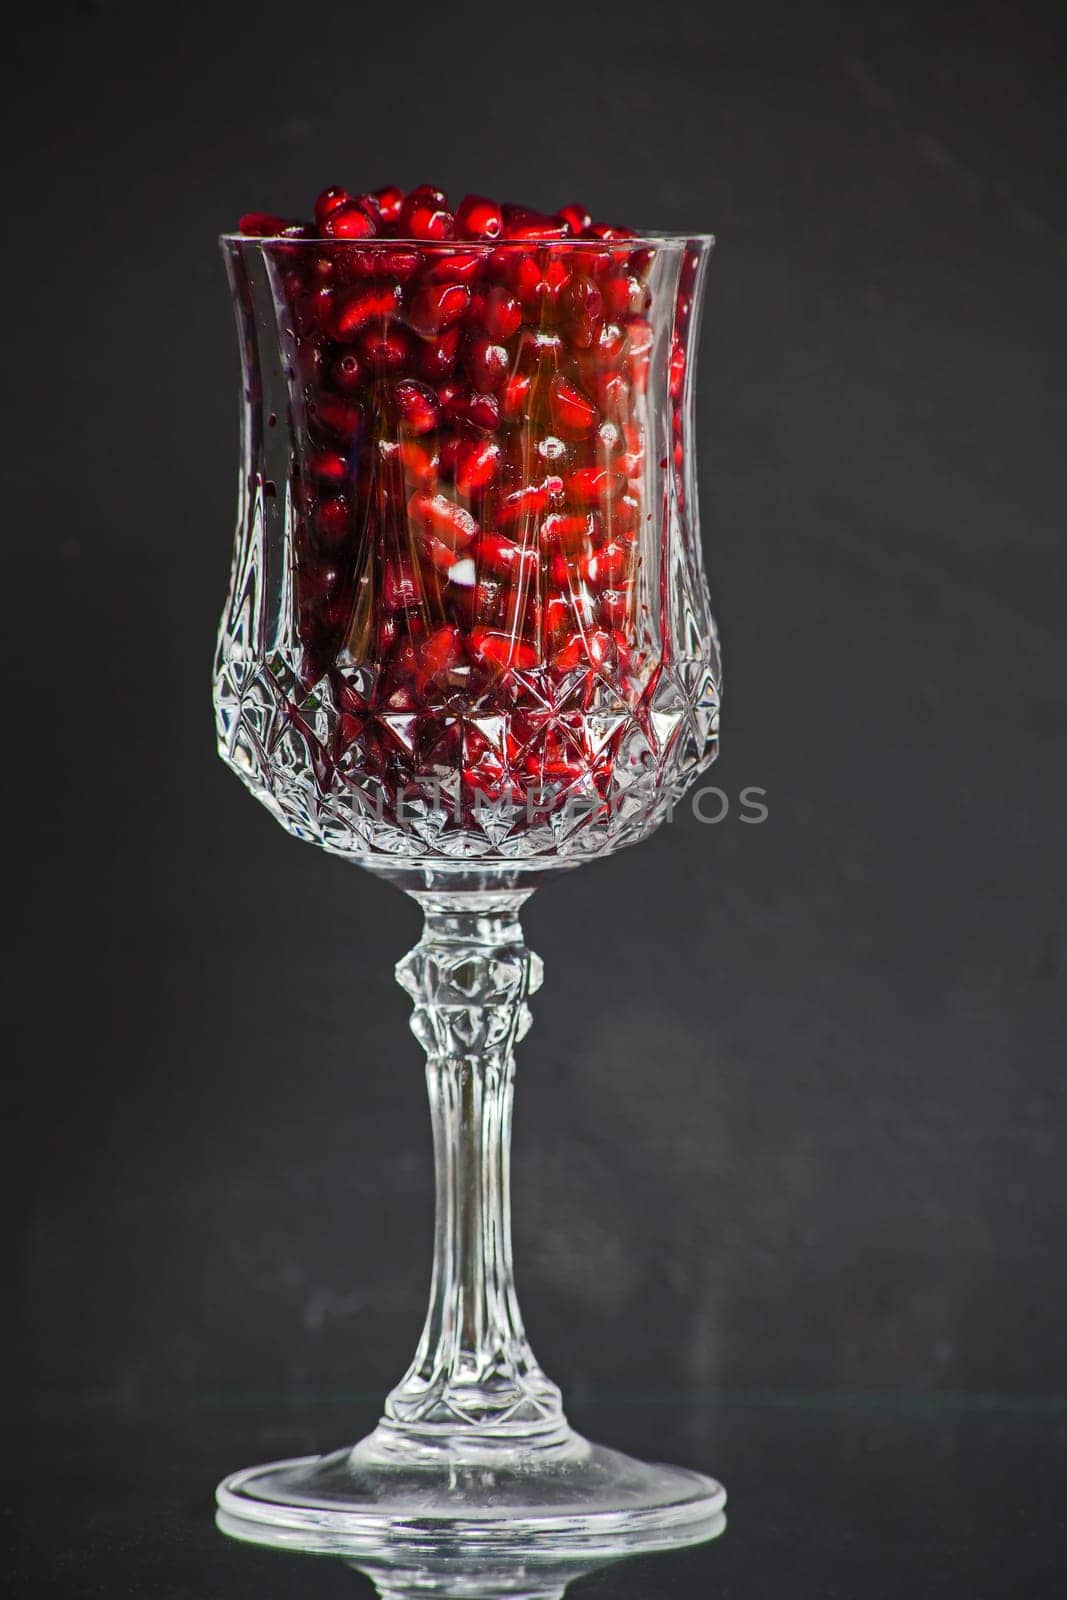 Pomegranate in Crystal glass 10590 by kobus_peche